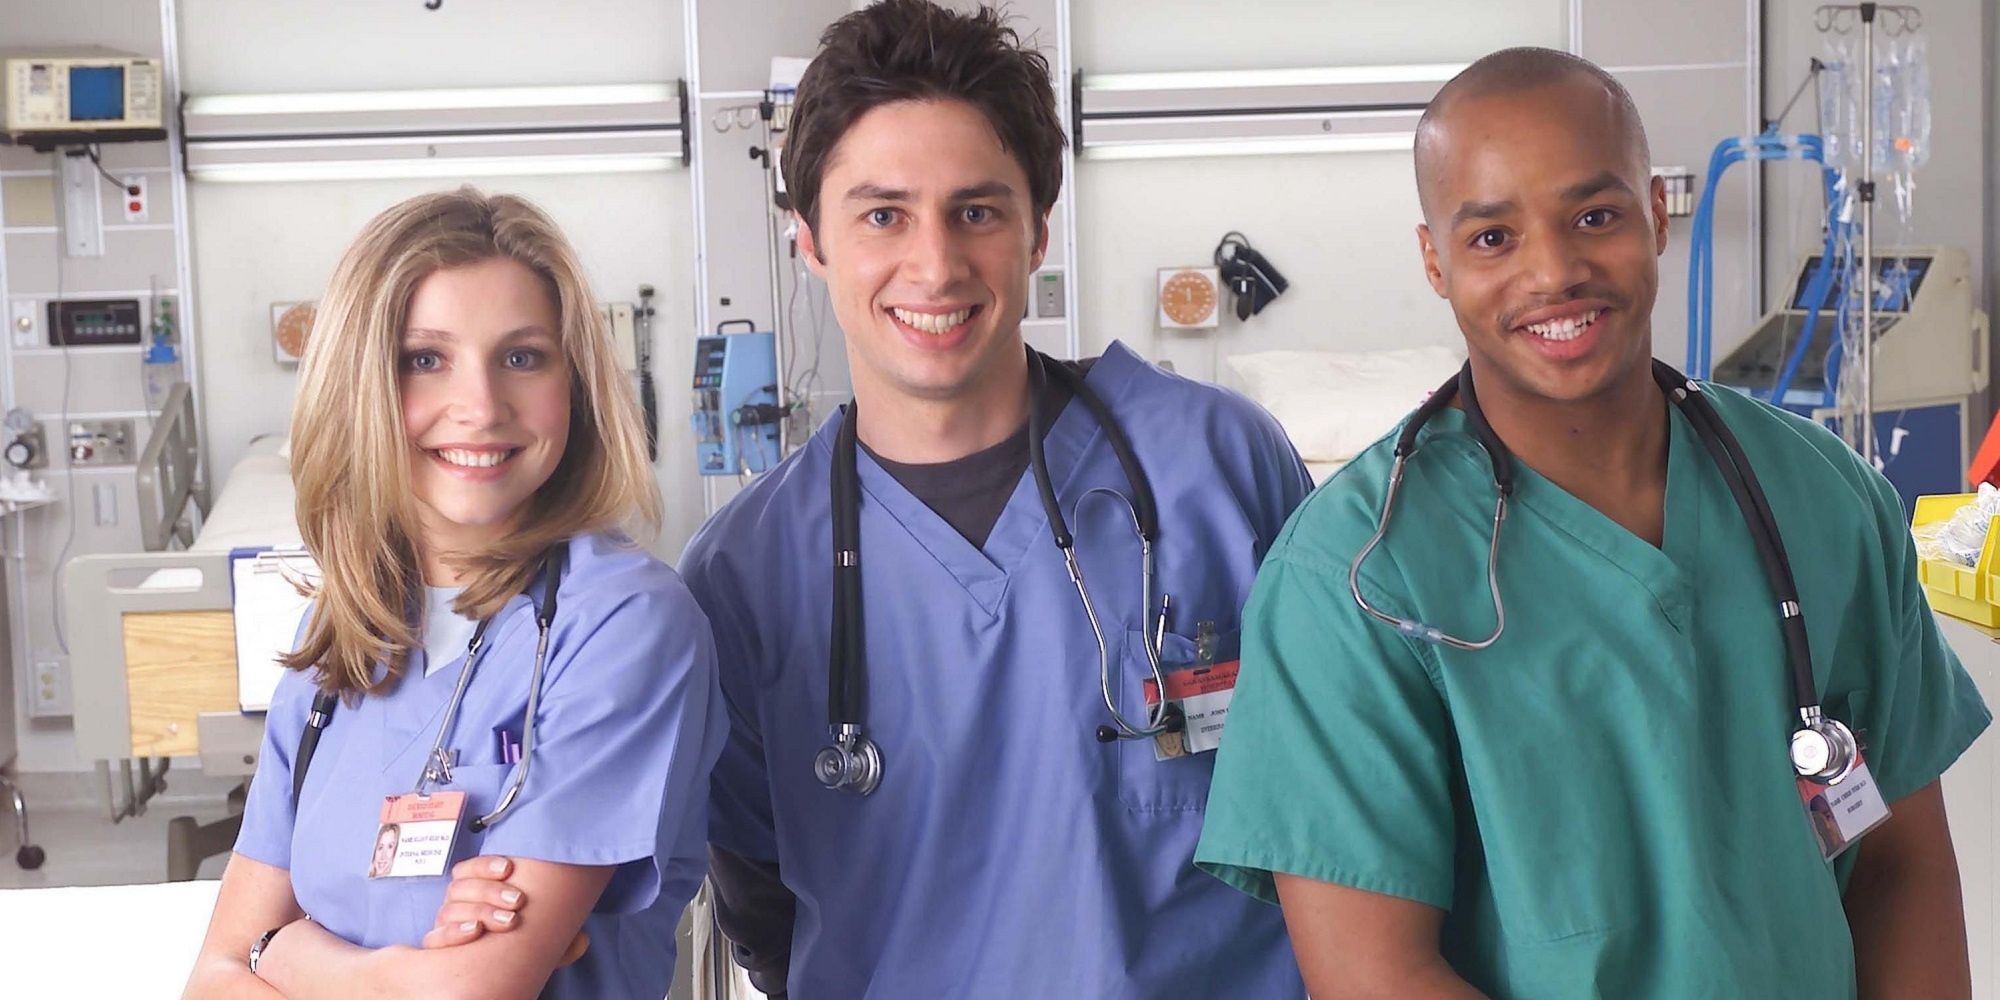 Elliot, JD, and Turk smiles for a photo in Scrubs